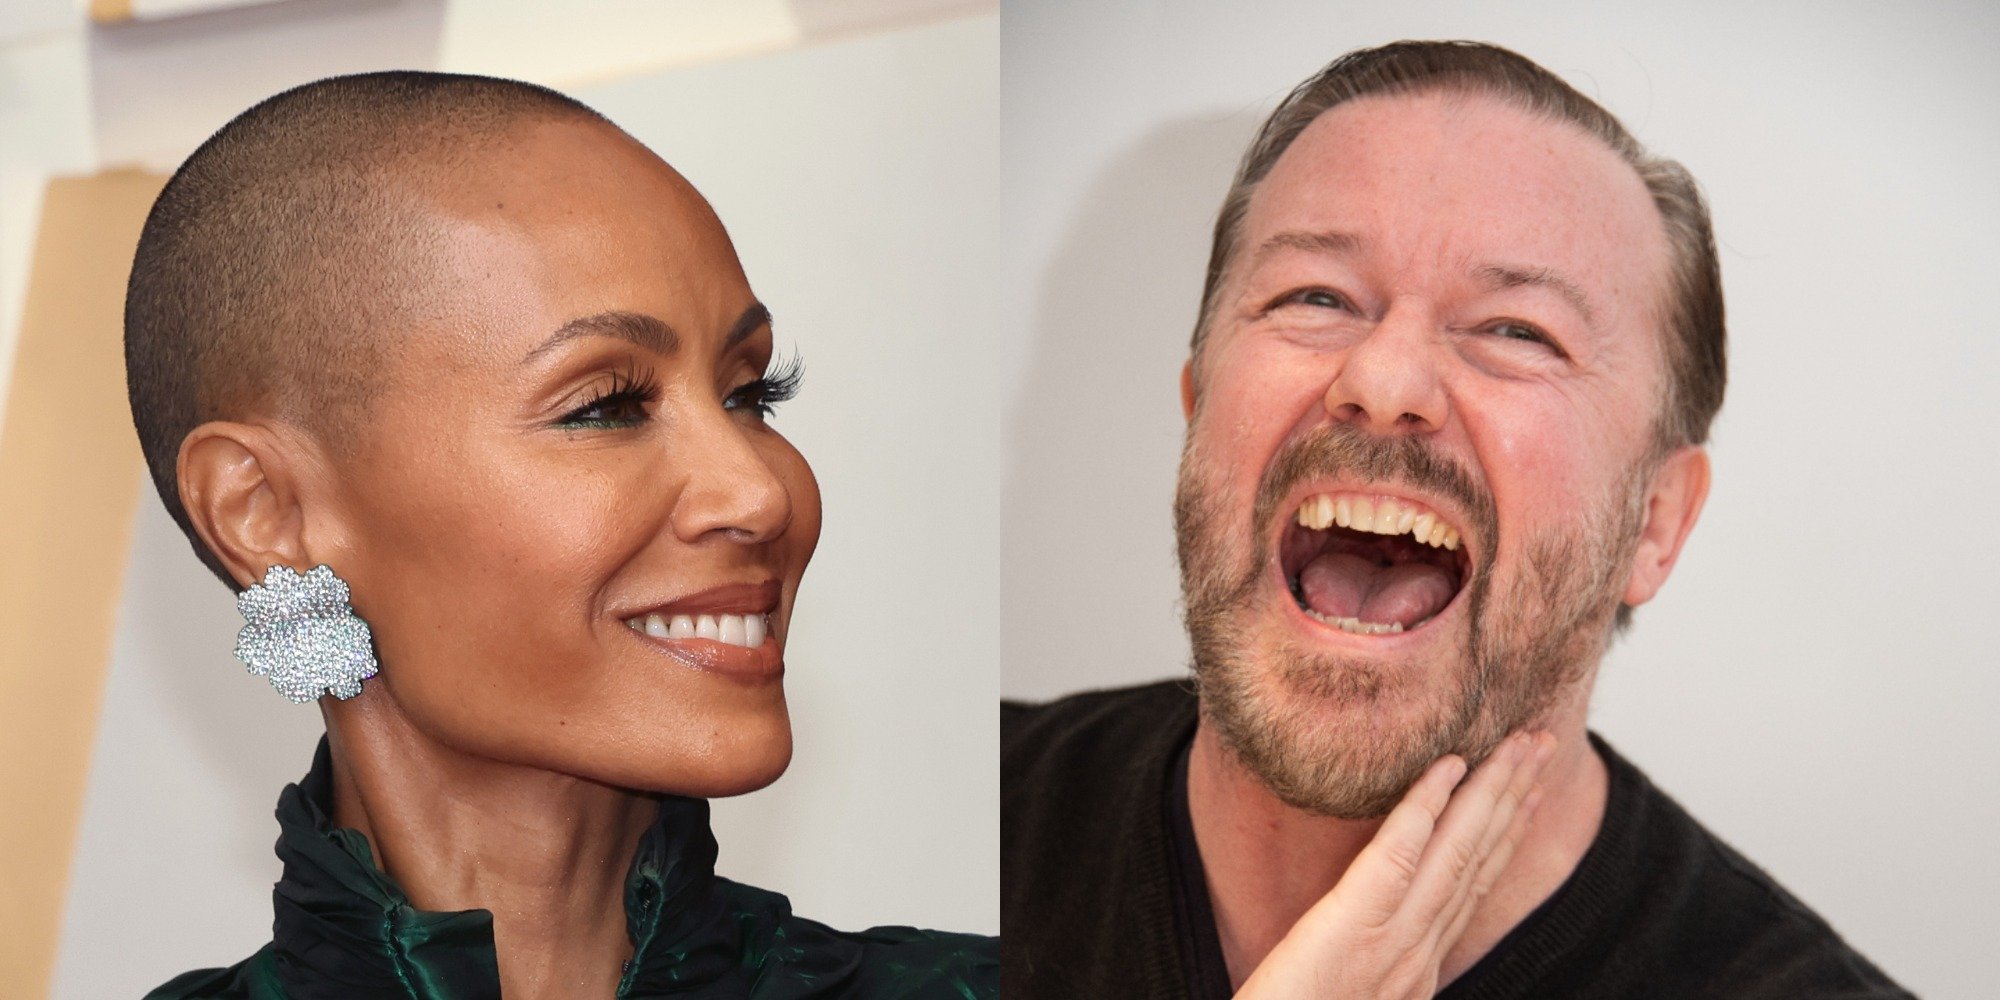 Jada Pinkett Smith and Ricky Gervais in side-by-side composite.